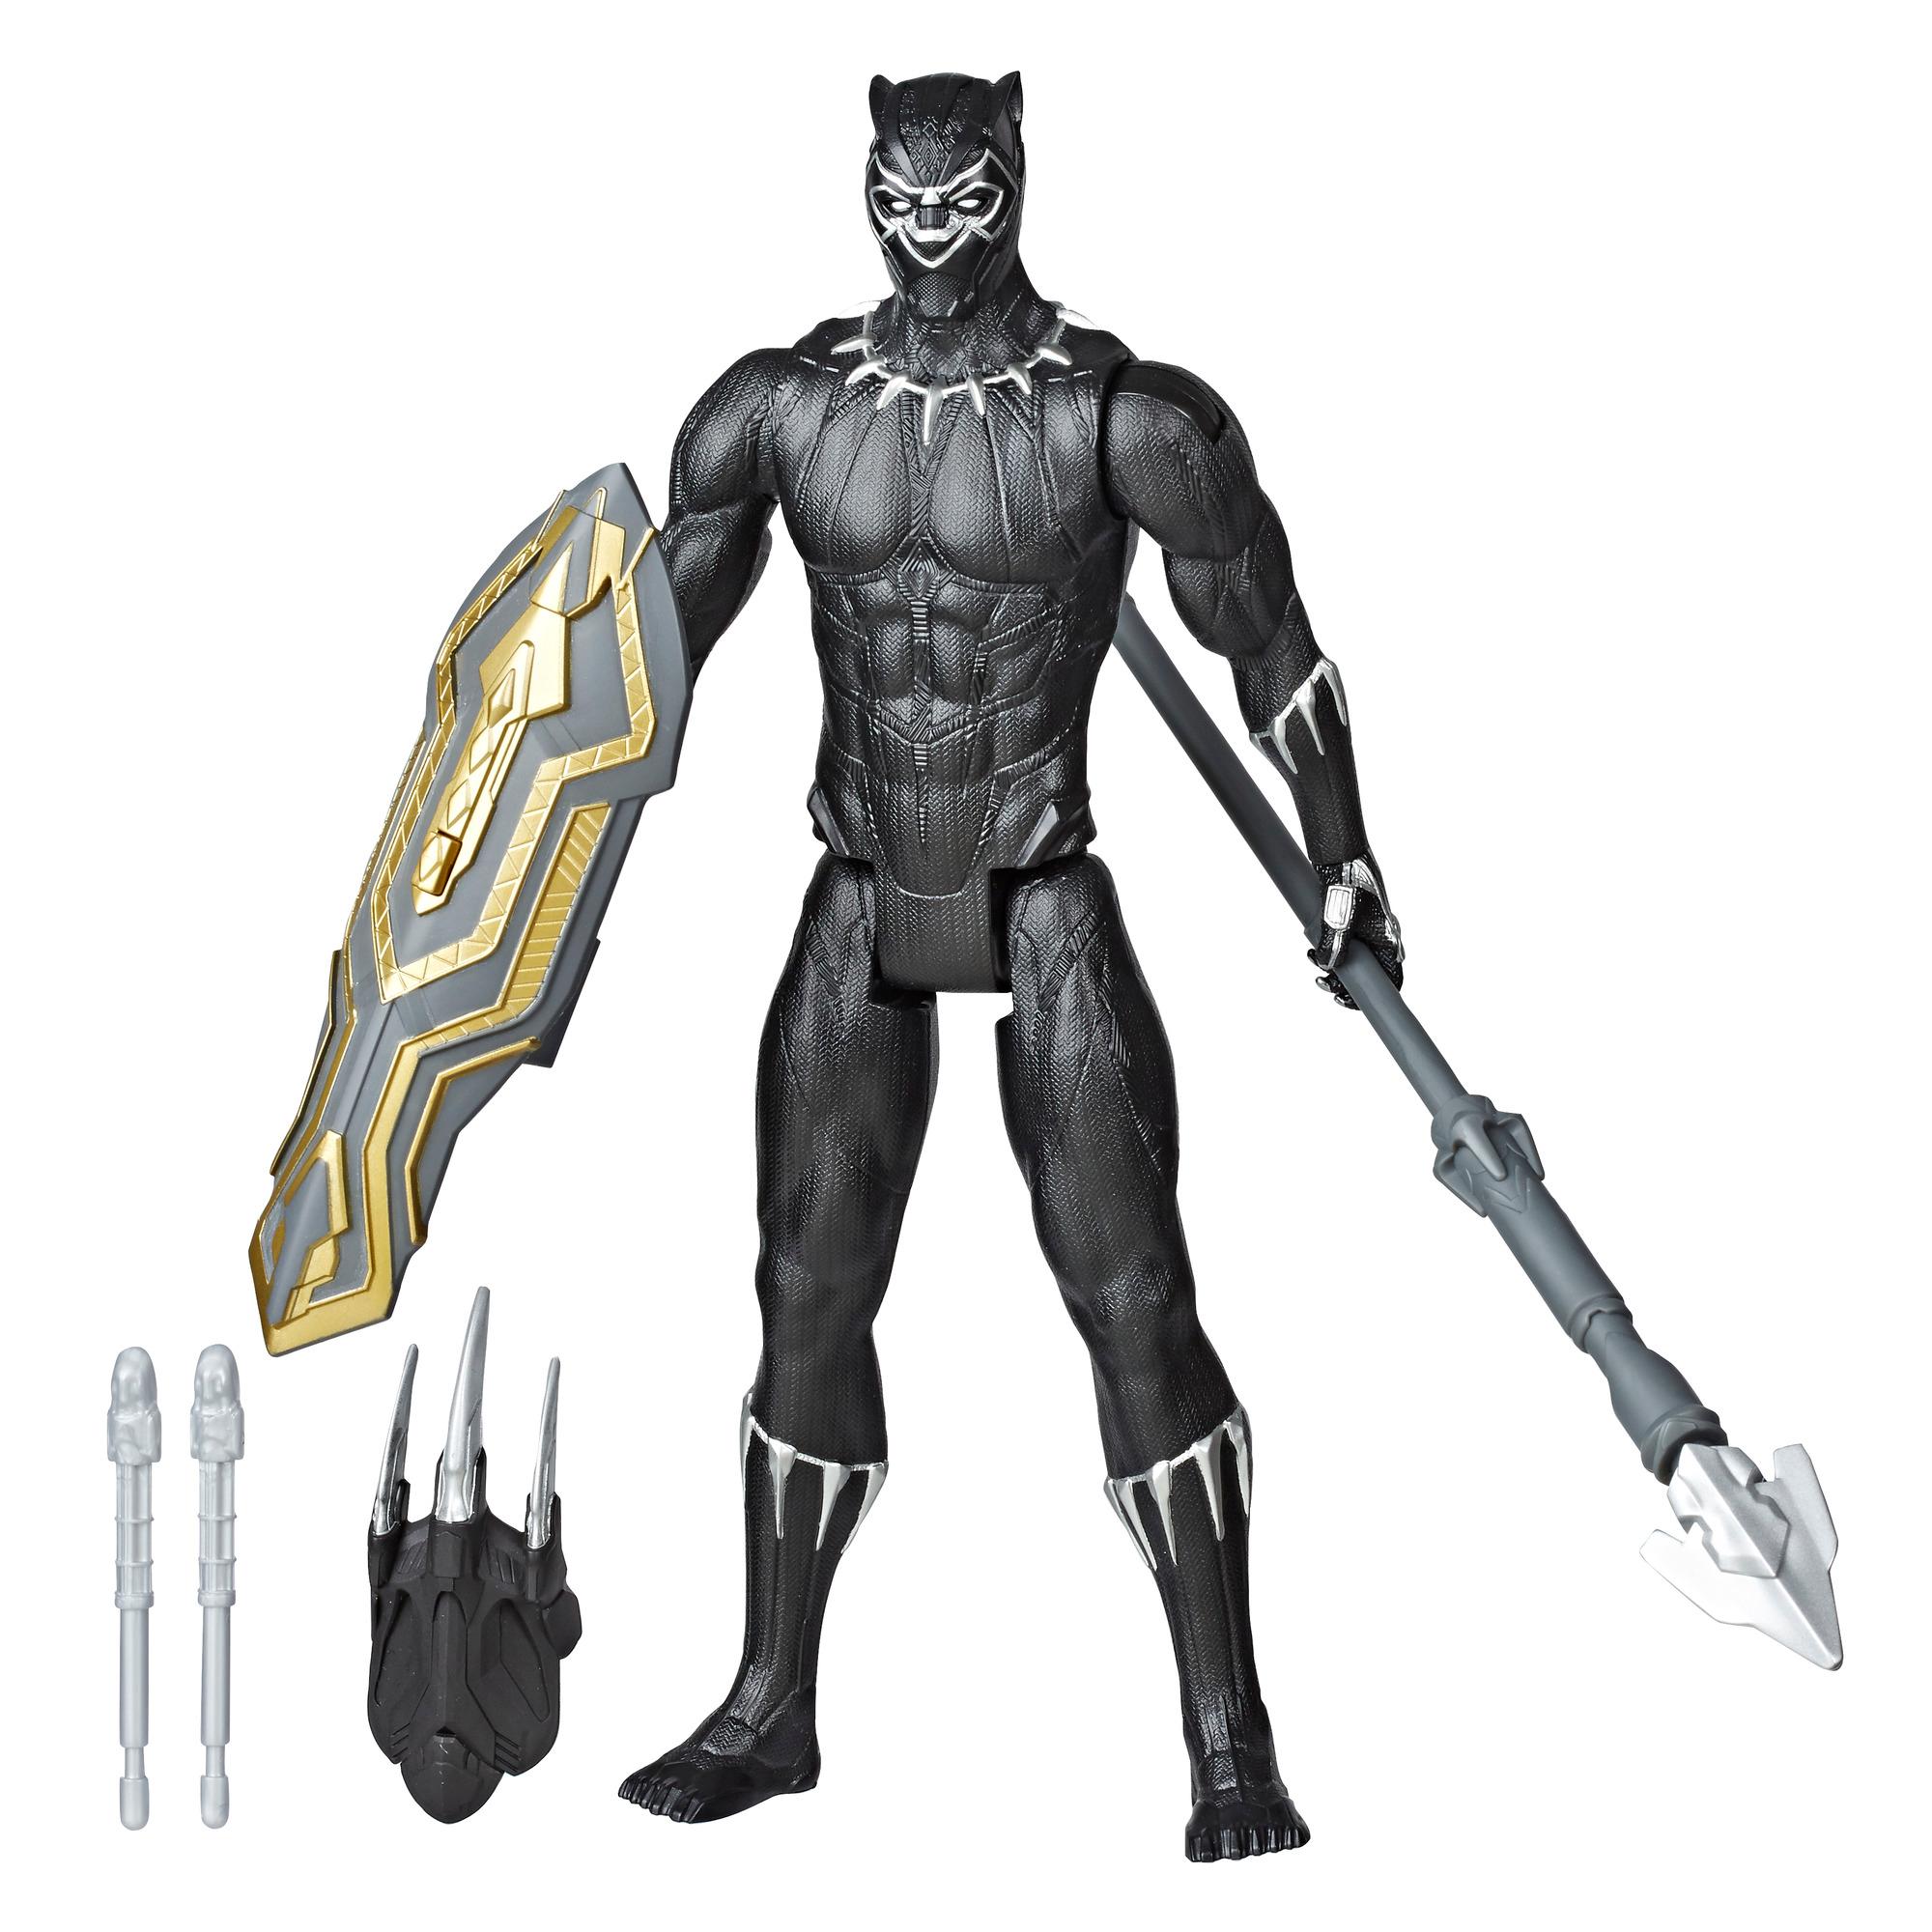 Marvel Avengers Titan Hero Series Blast Gear Deluxe Black Panther Action Figure, 12-Inch Toy, For Kids Ages 4 And Up